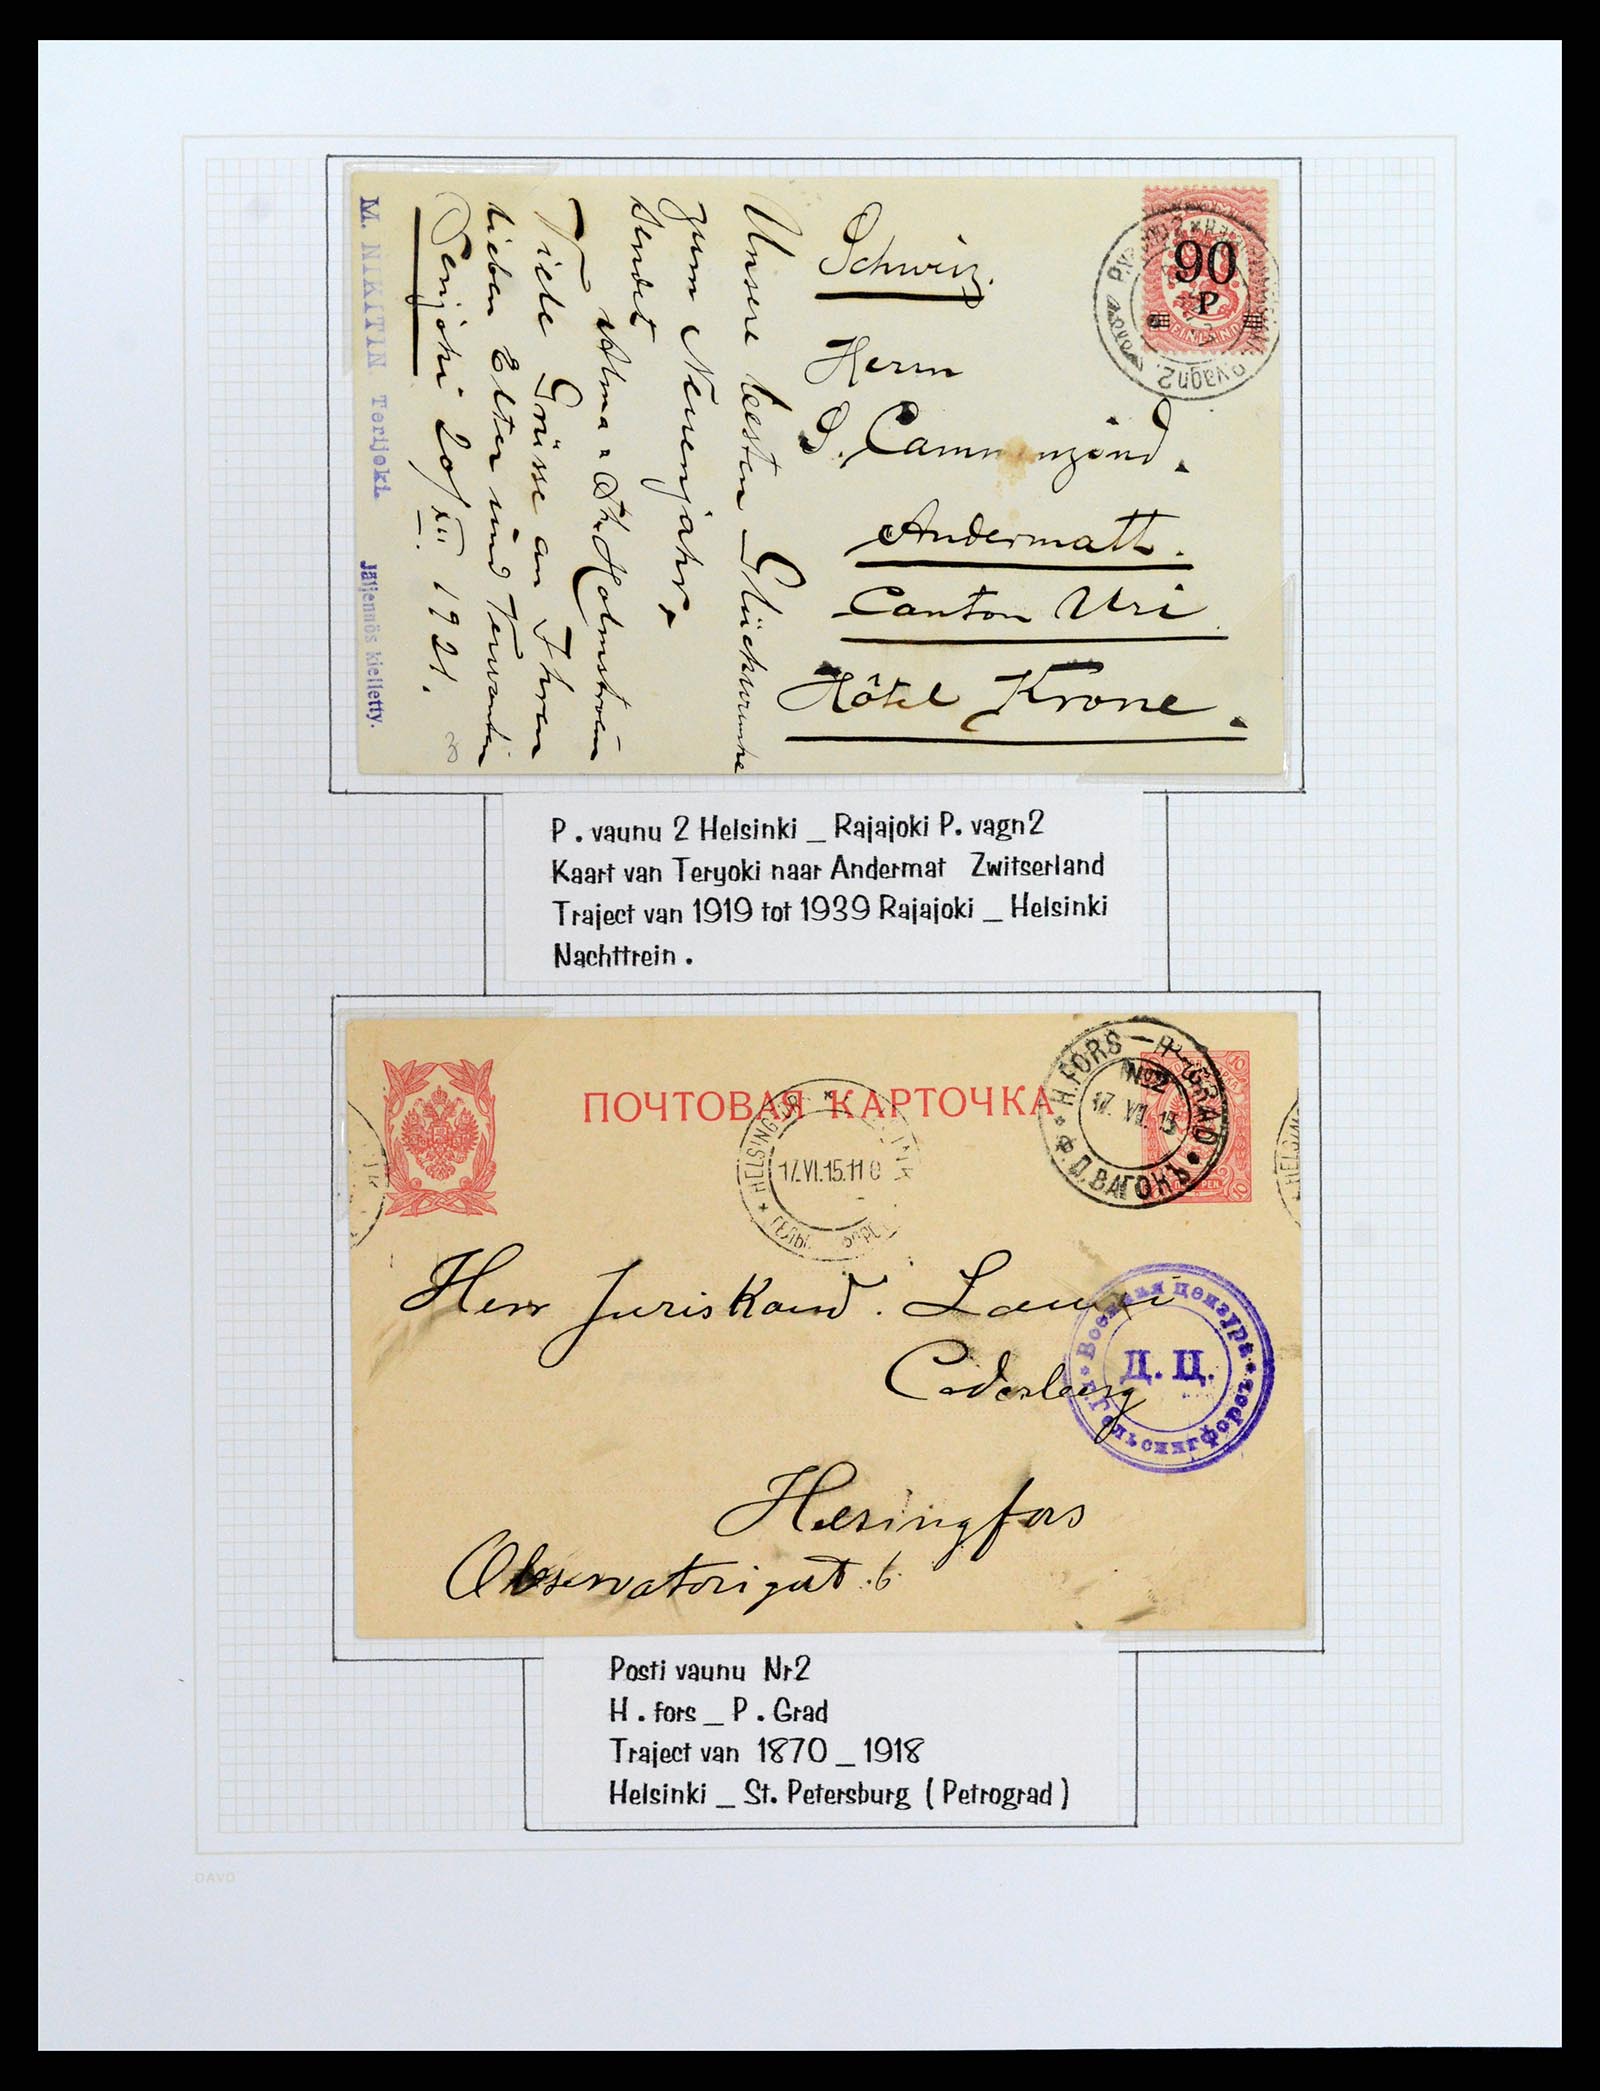 37766 019 - Stamp collection 37766 Finland railway cancellations 1870-1950.